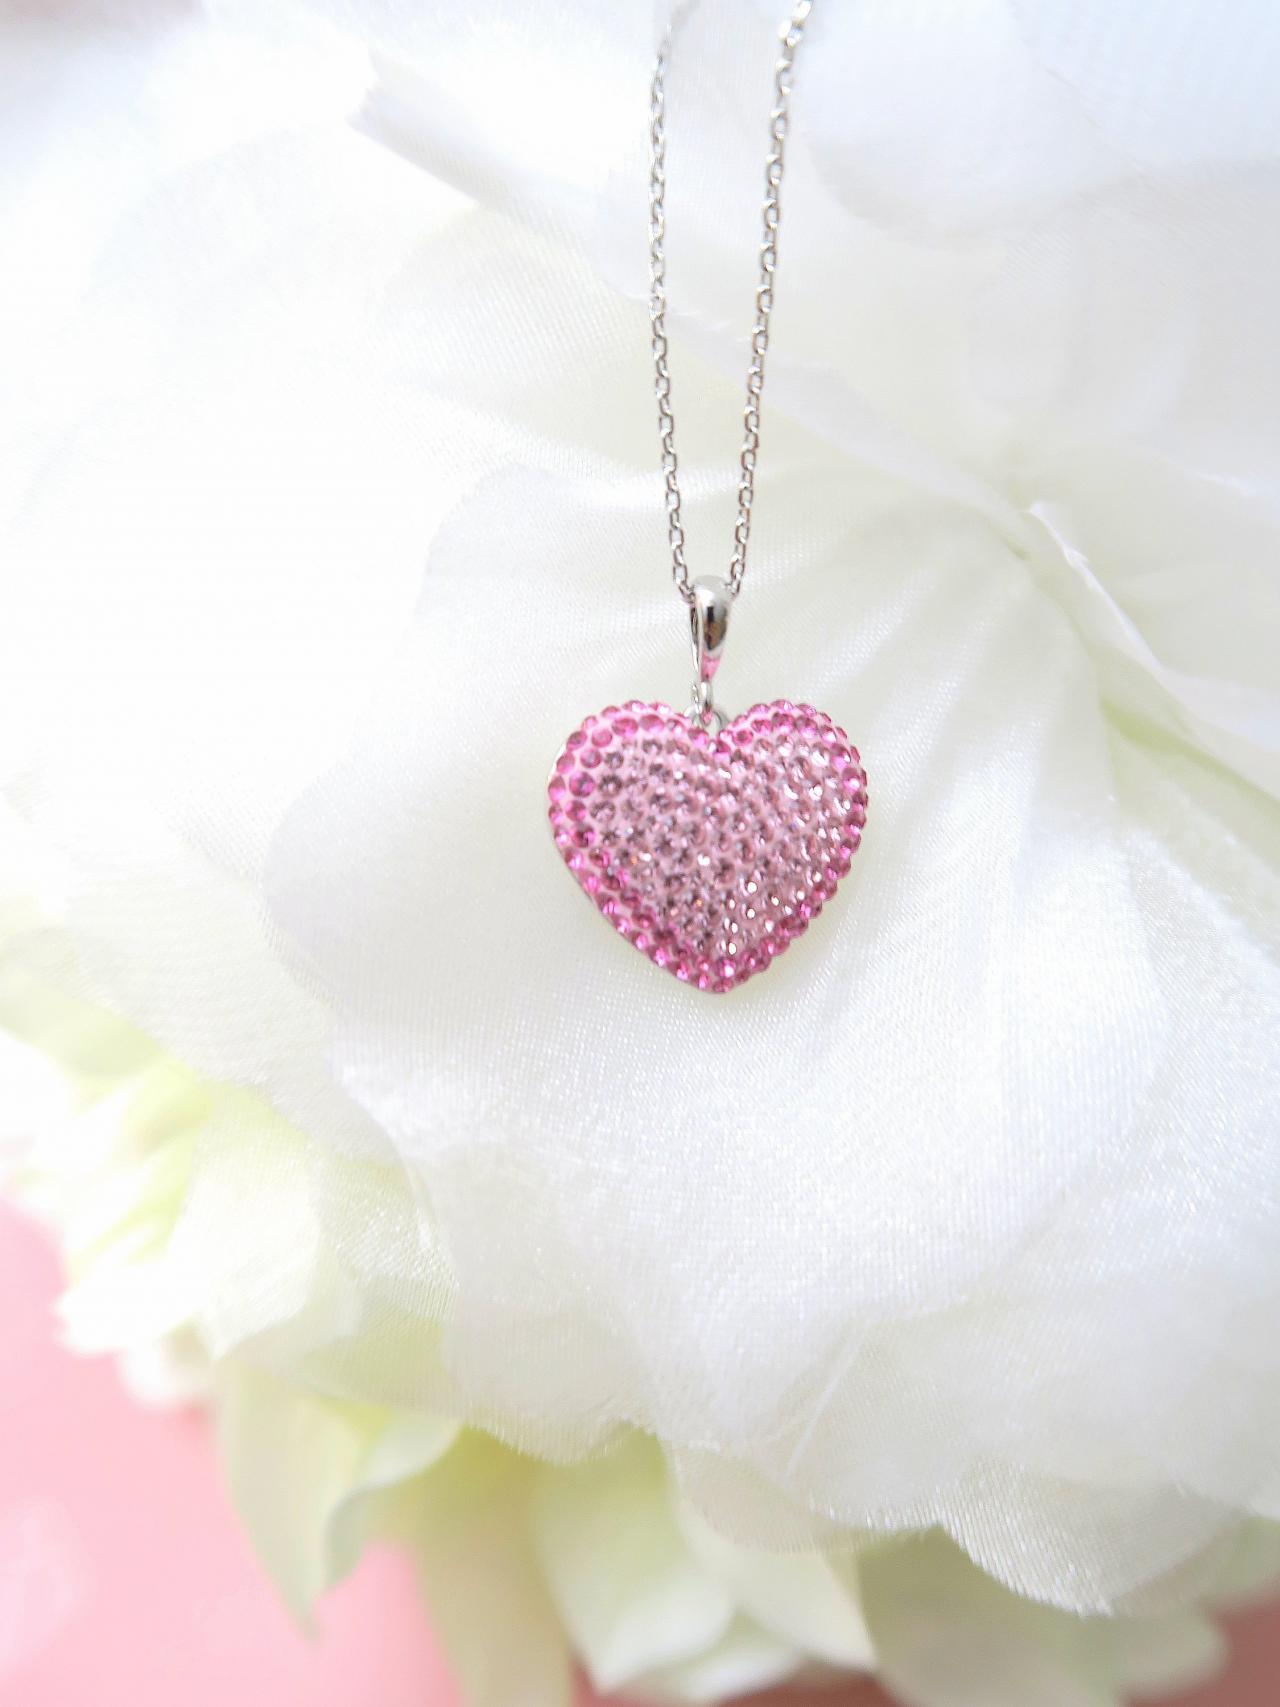 Pink Heart Crystal Charm Necklace Swarovski Becharmed Pave Heart Crystal Valentine's Day Gift Birthday Gift Mother's